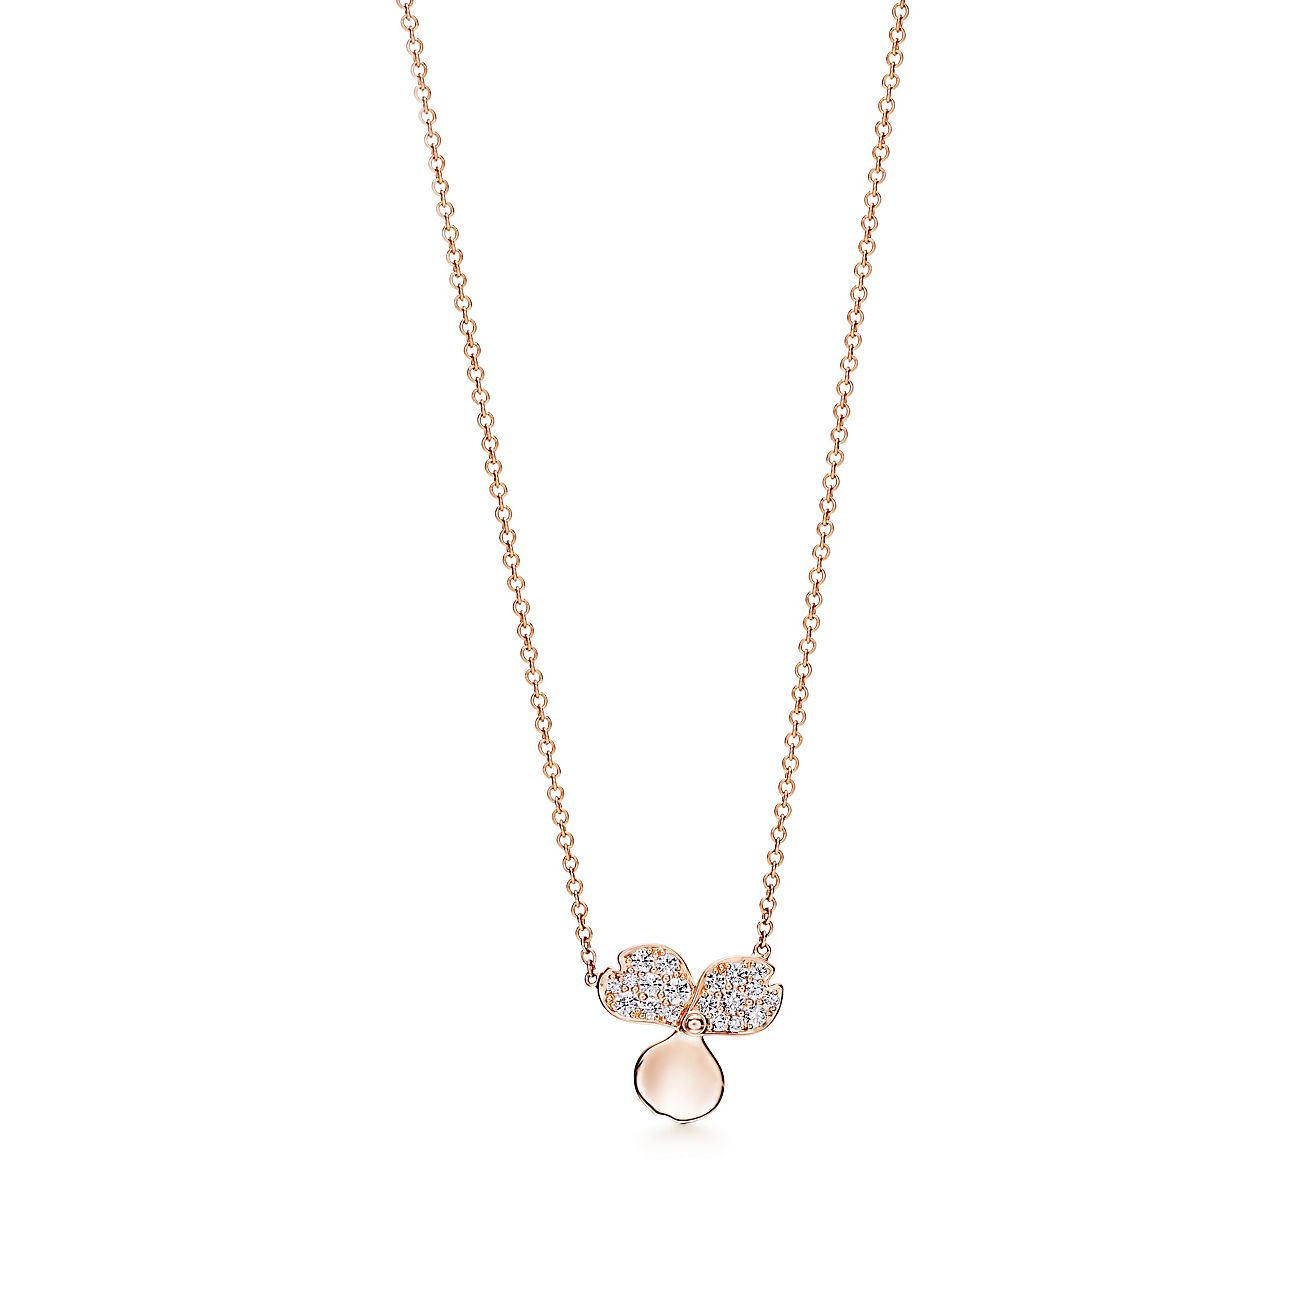 tiffany and co flower necklace